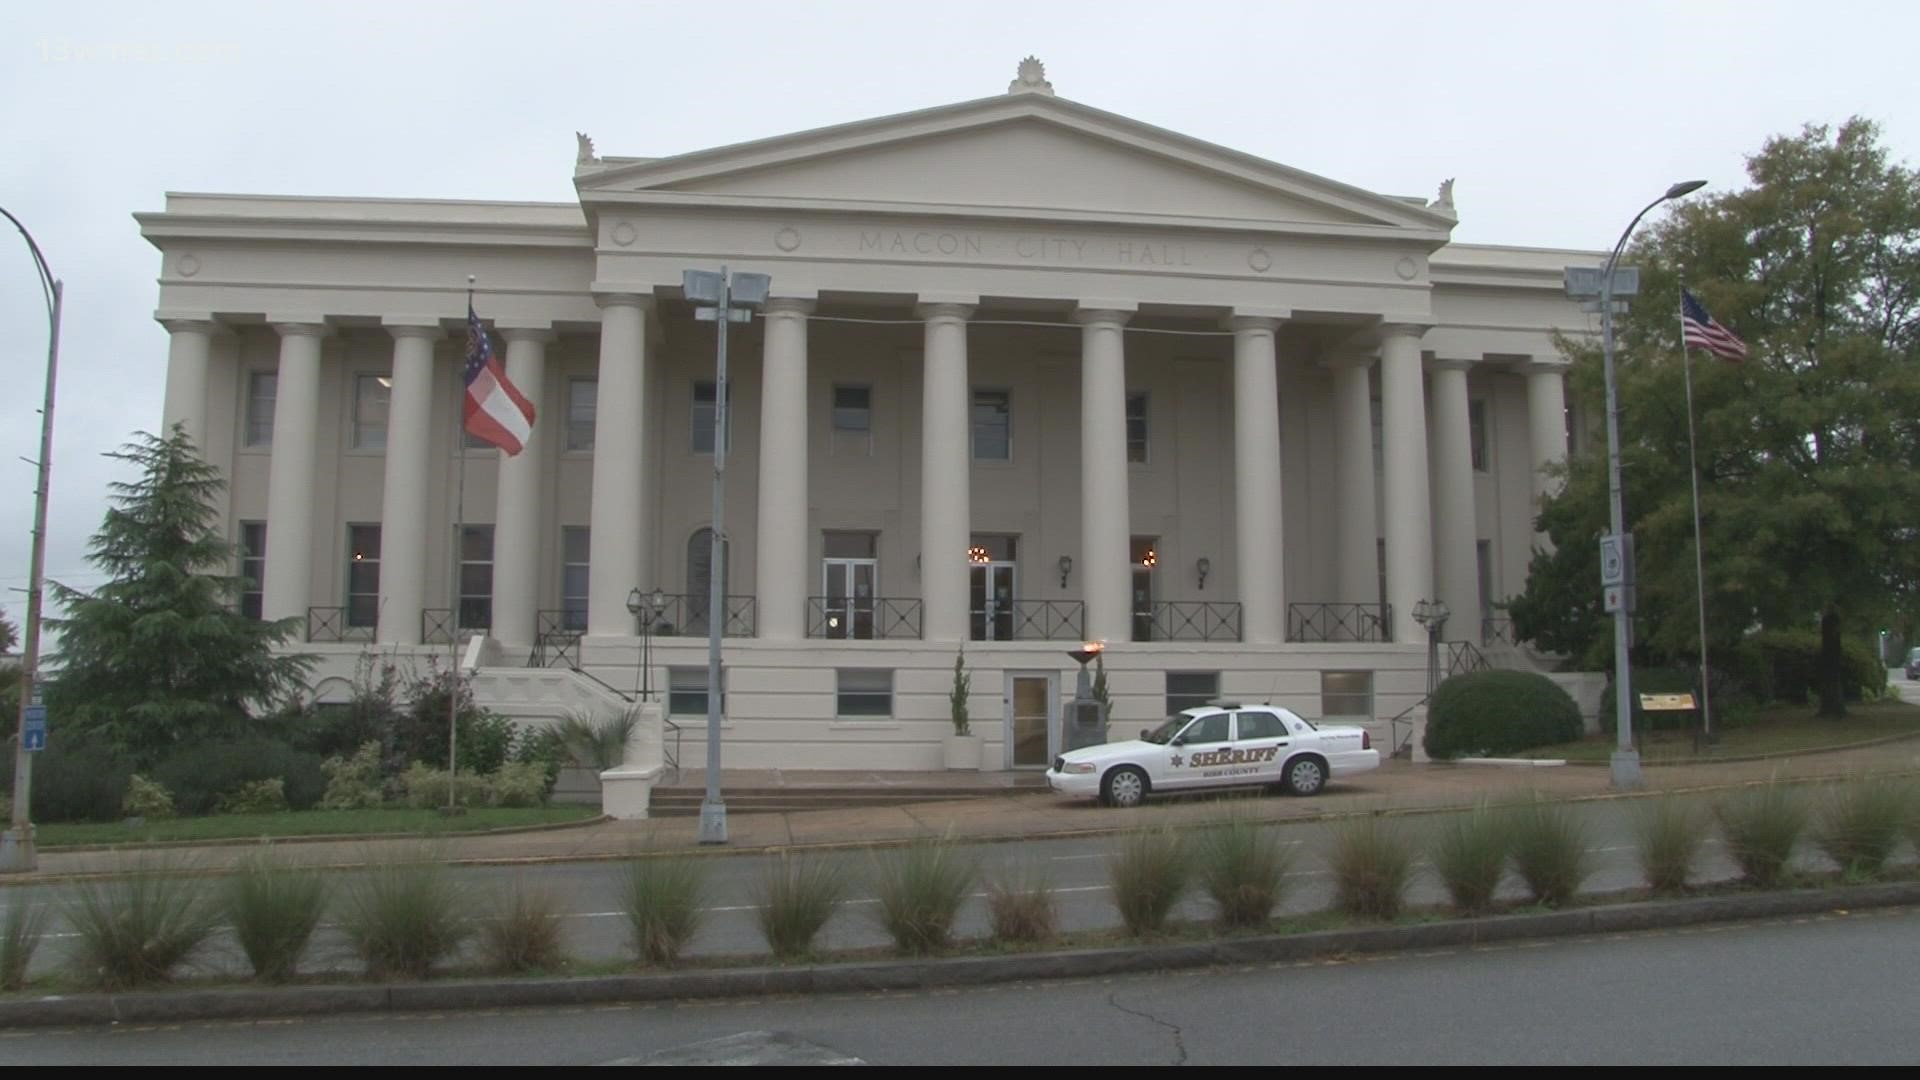 If approved, it would raise the sales tax in Macon-Bibb County by a penny starting Jan. 1. In return, county leaders say they'll roll back property taxes.